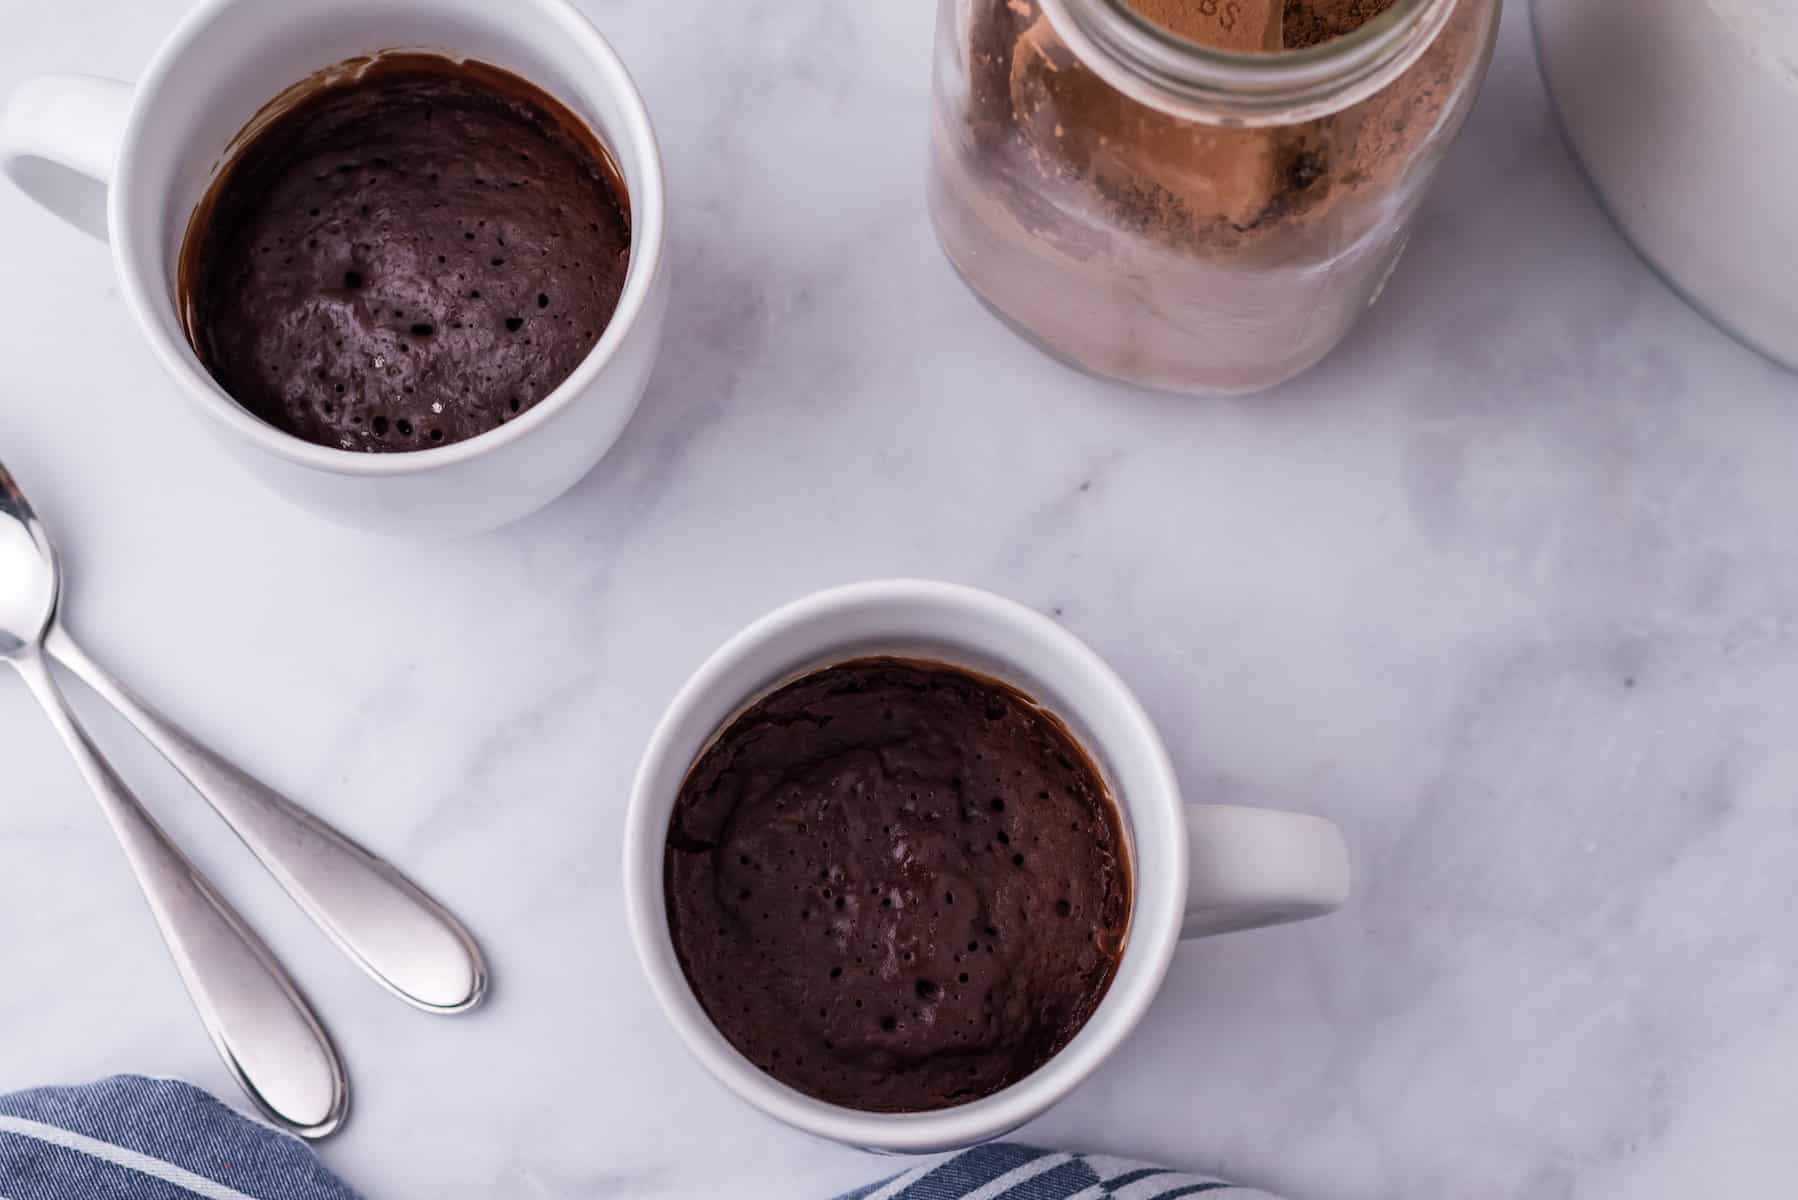 mug brownies just out of the microwave